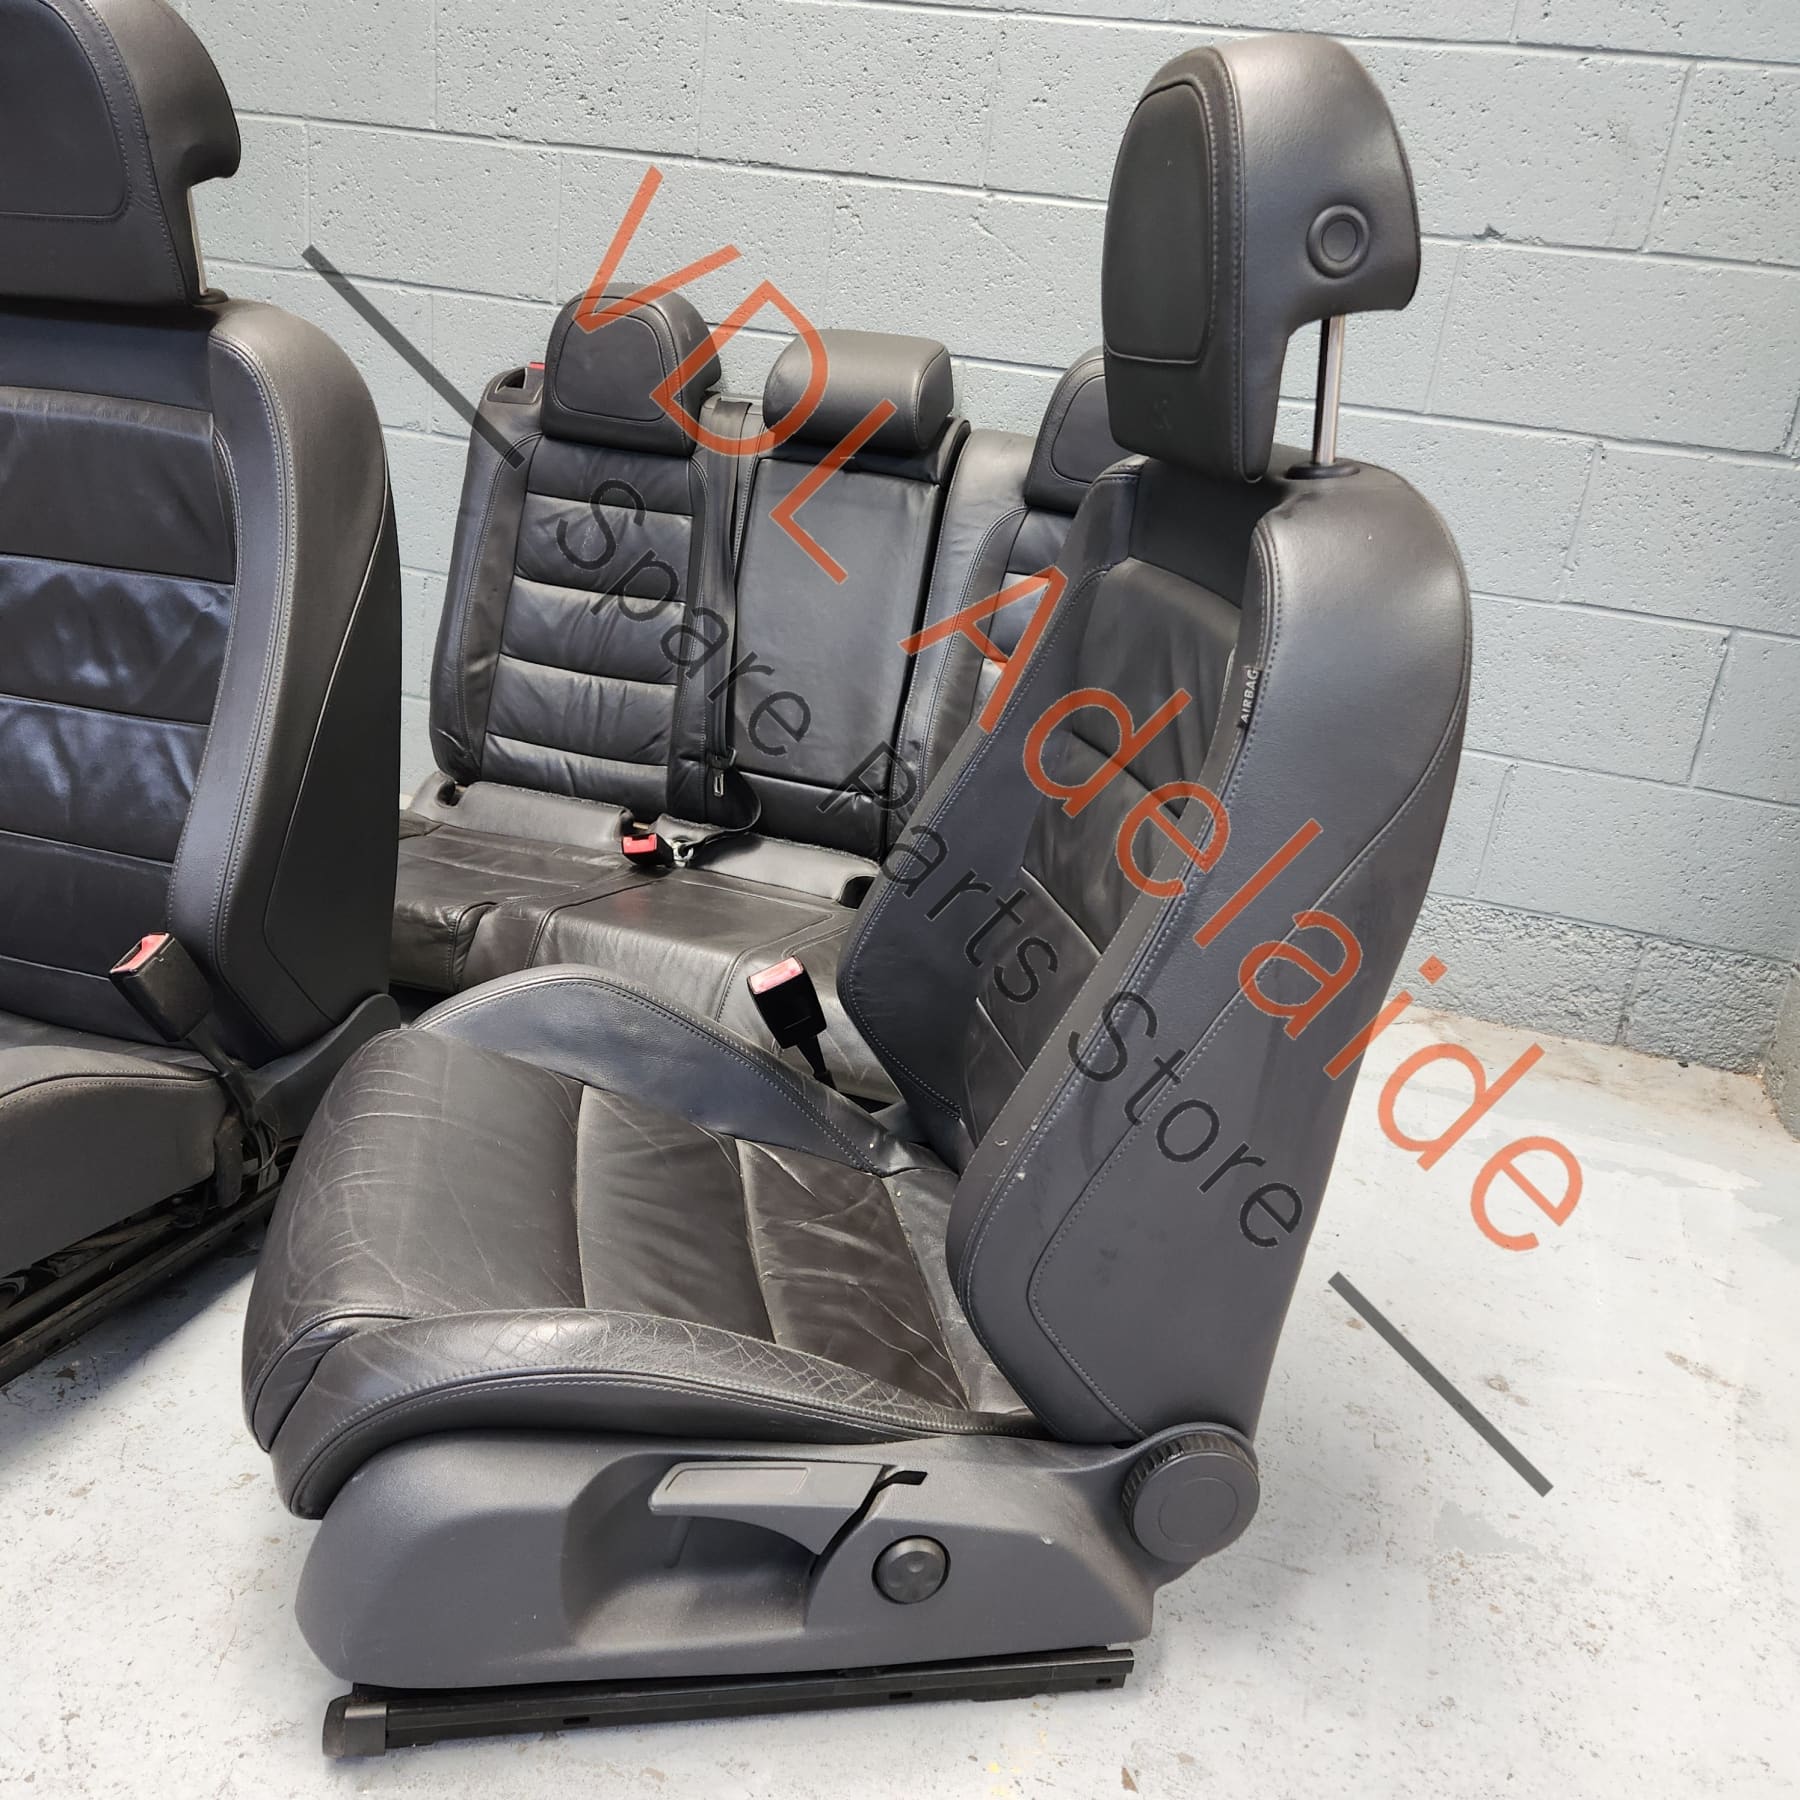     VW Golf R32 MK5 Complete set of Leather Sport Seats Interior Trim w/Heaters